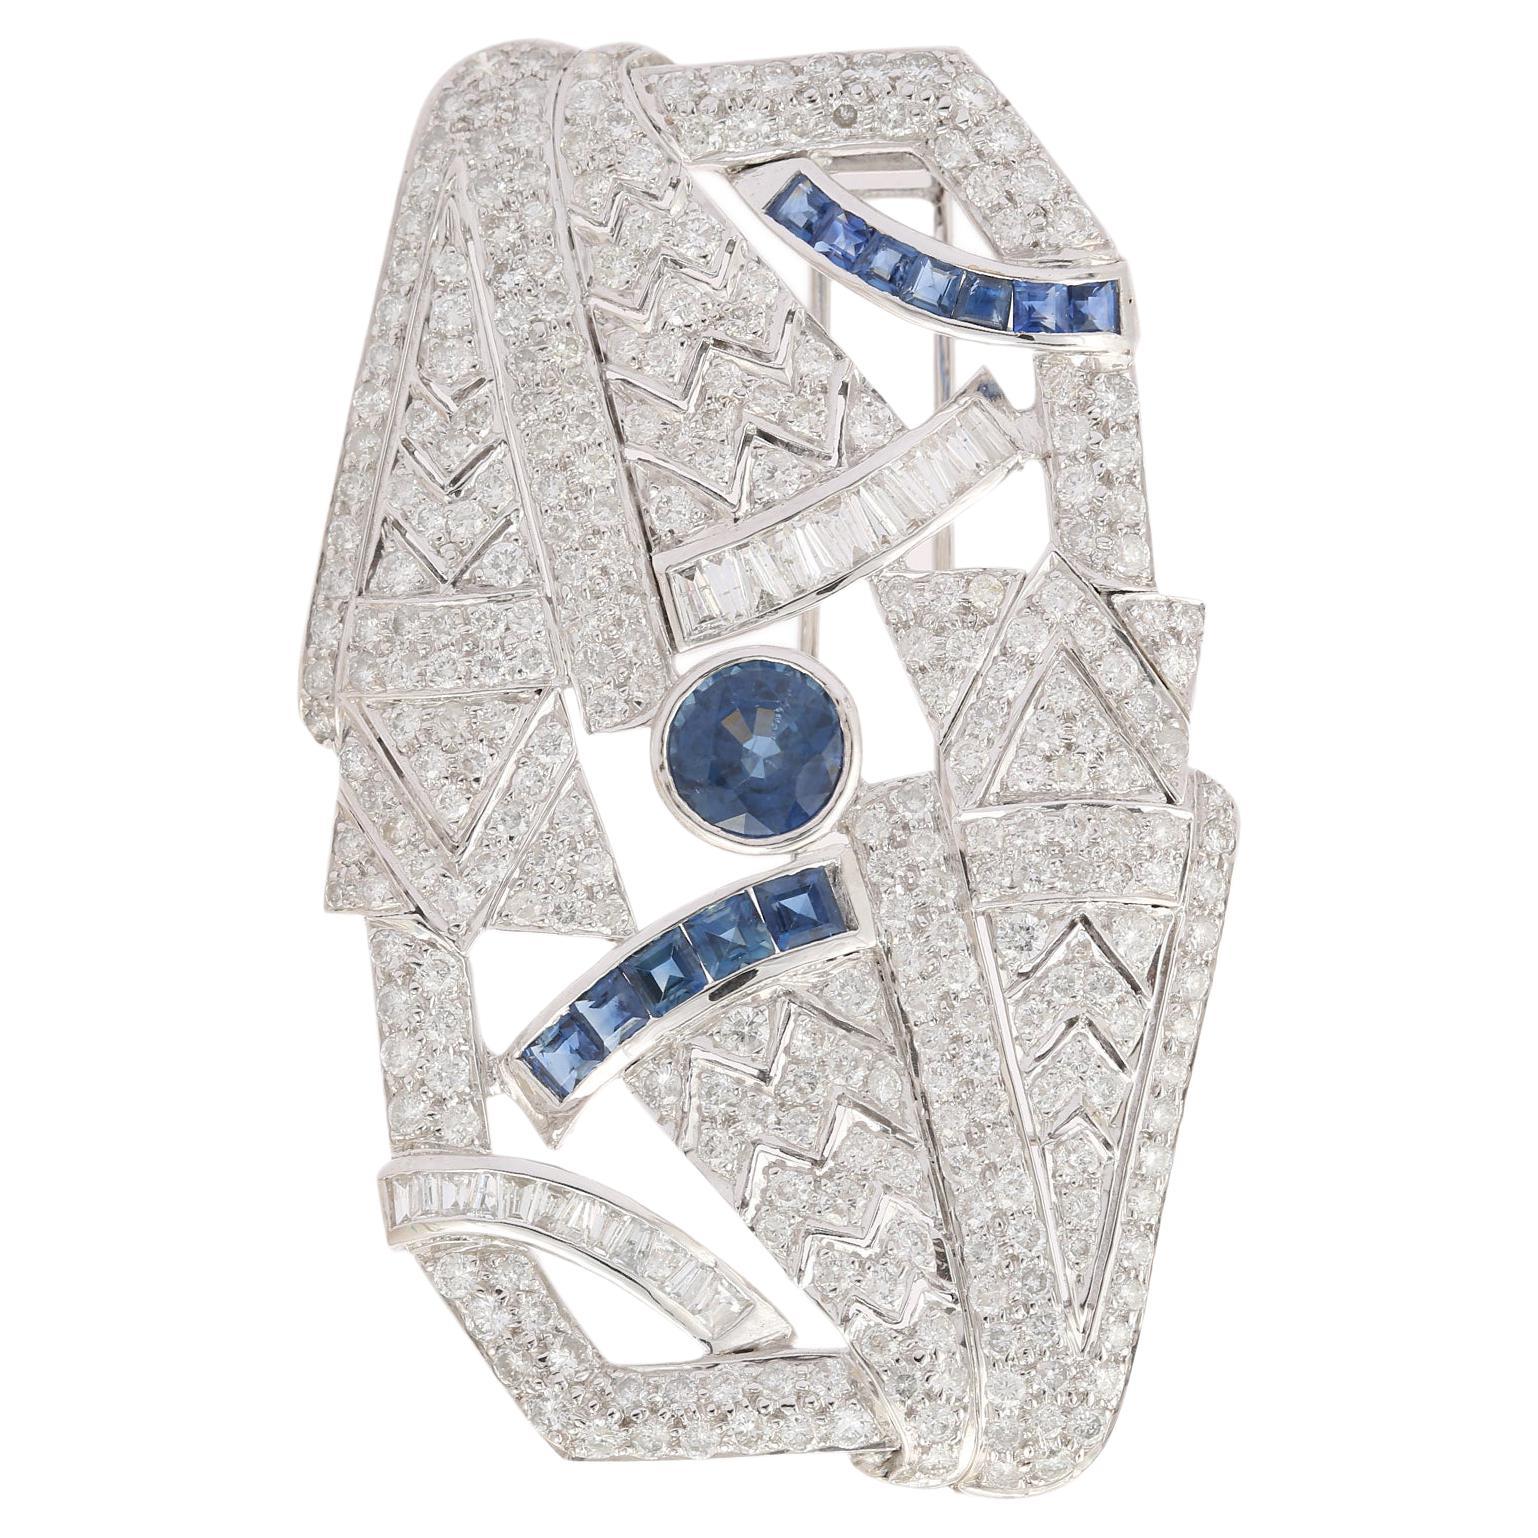  Art Deco 5.96 CTW Diamond and 3.9 CTW Sapphire Brooch 18k Solid White Gold